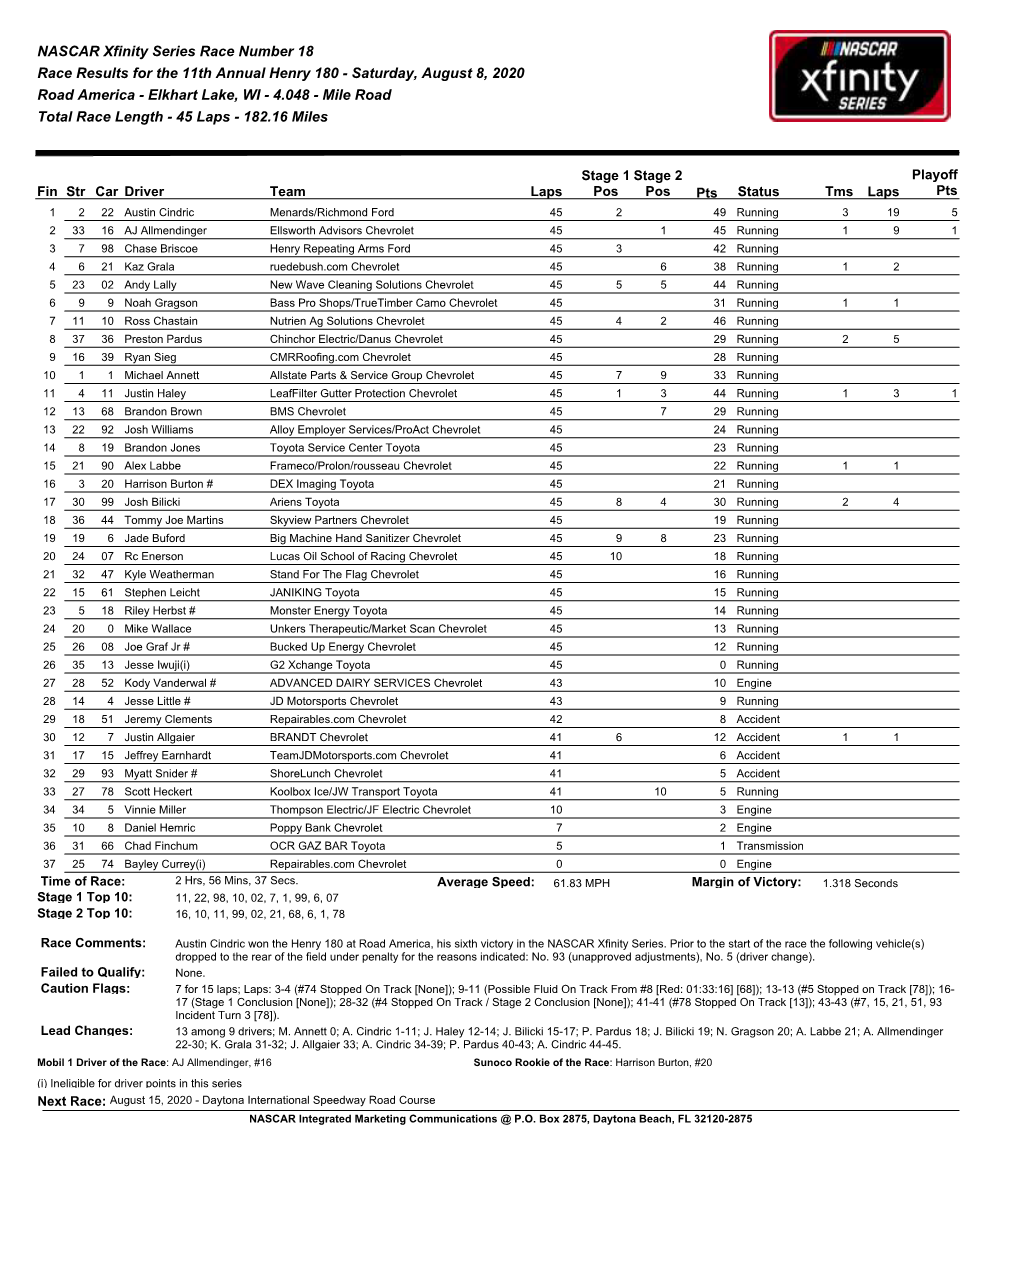 NASCAR Xfinity Series Race Number 18 Race Results for the 11Th